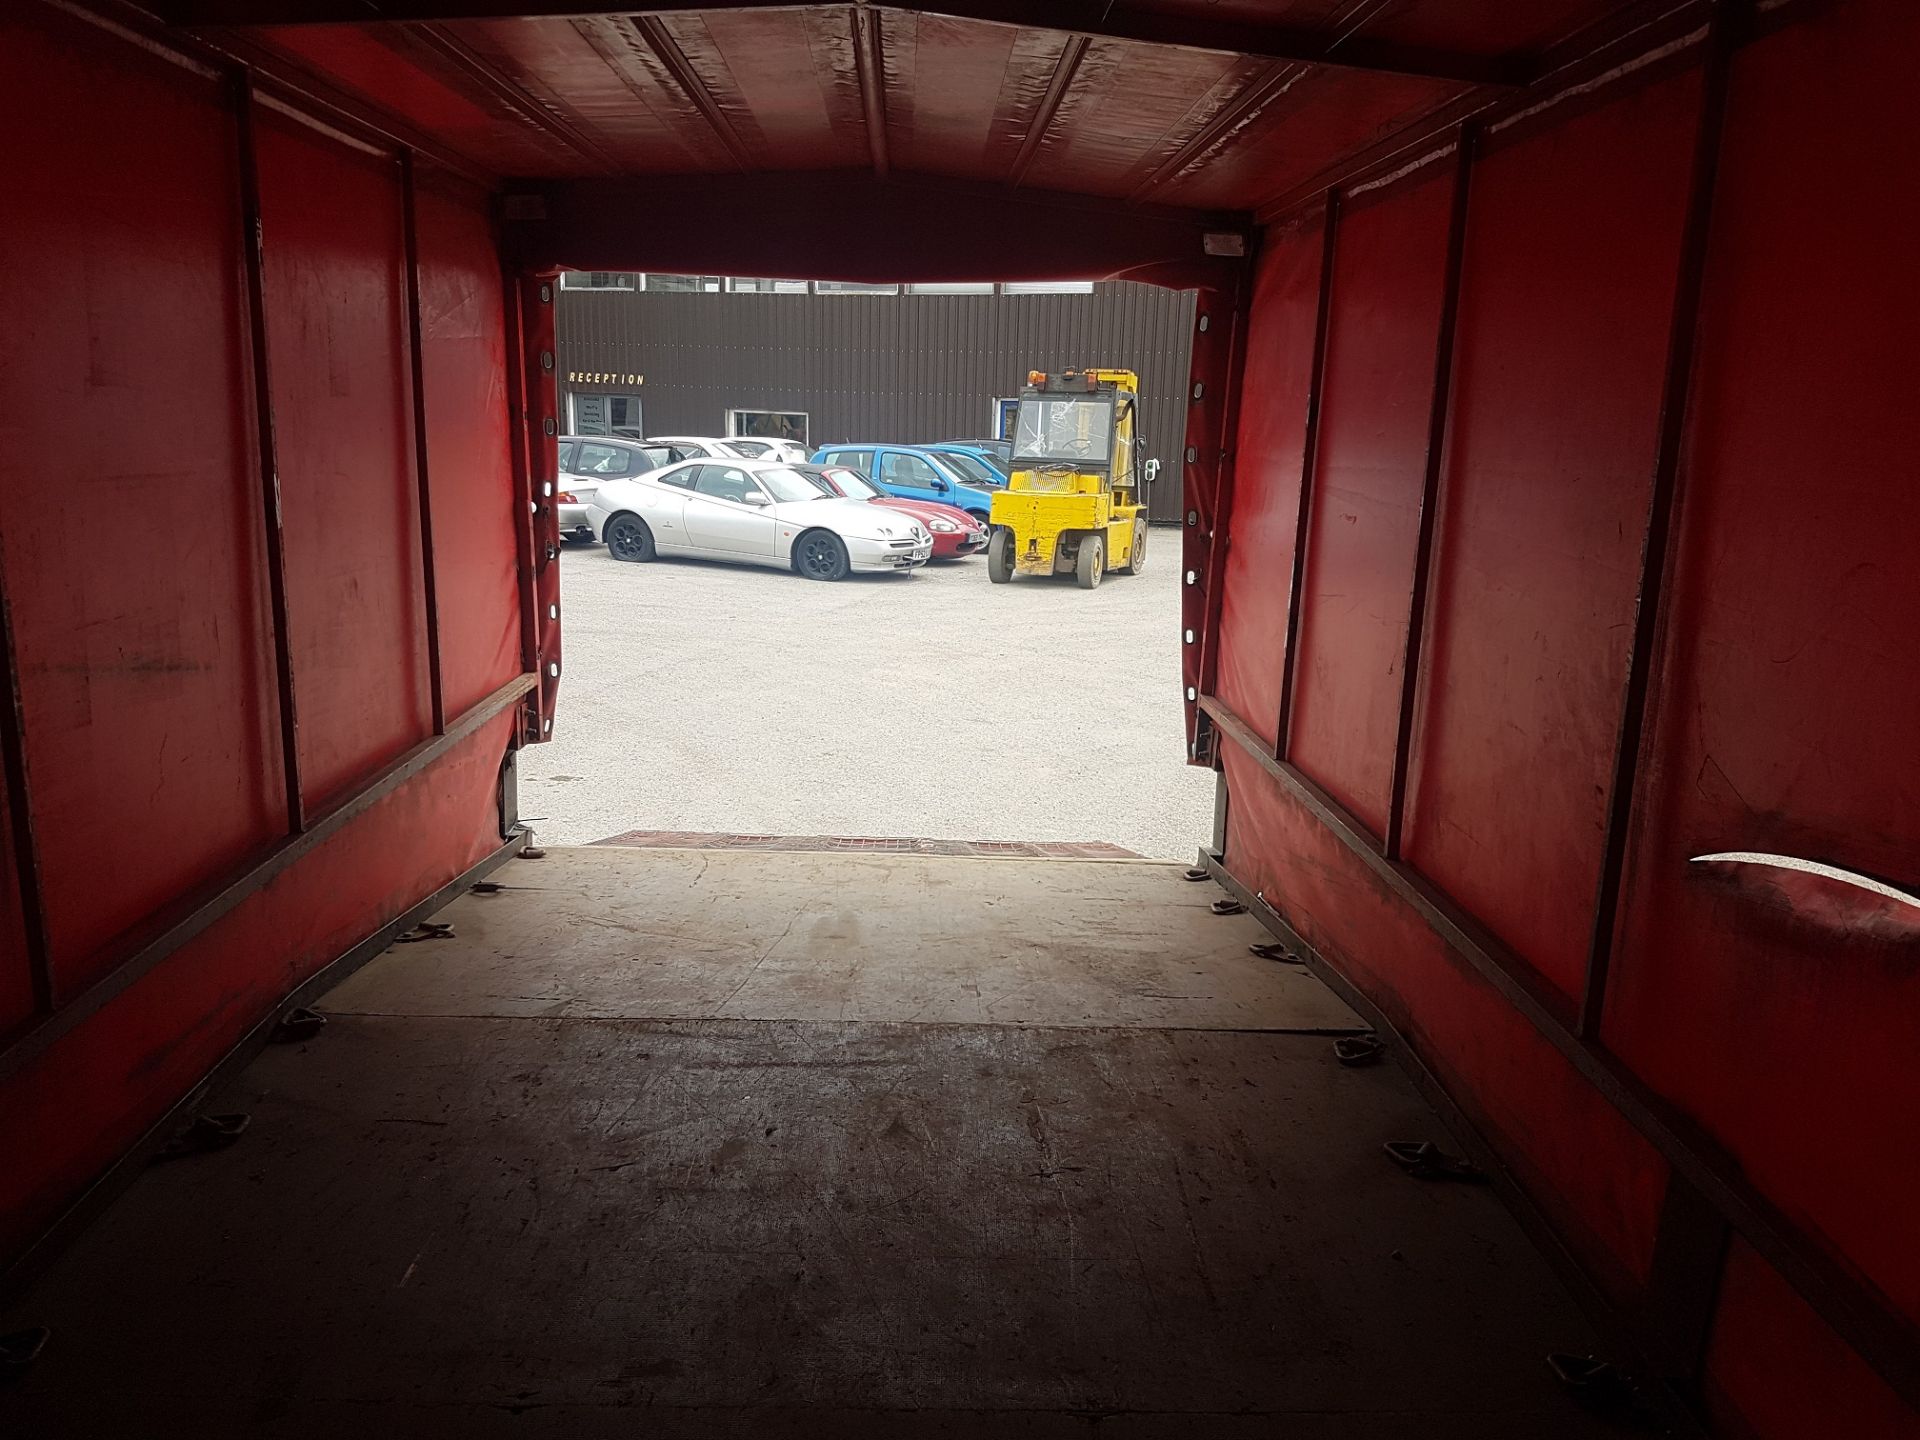 TRI-AXLE BEAVER-TAIL CAR TRANSPORTER COVERED TRAILER - 5.5 METRE BED LENGTH!  *PLUS VAT*   CAN FIT A - Image 12 of 14